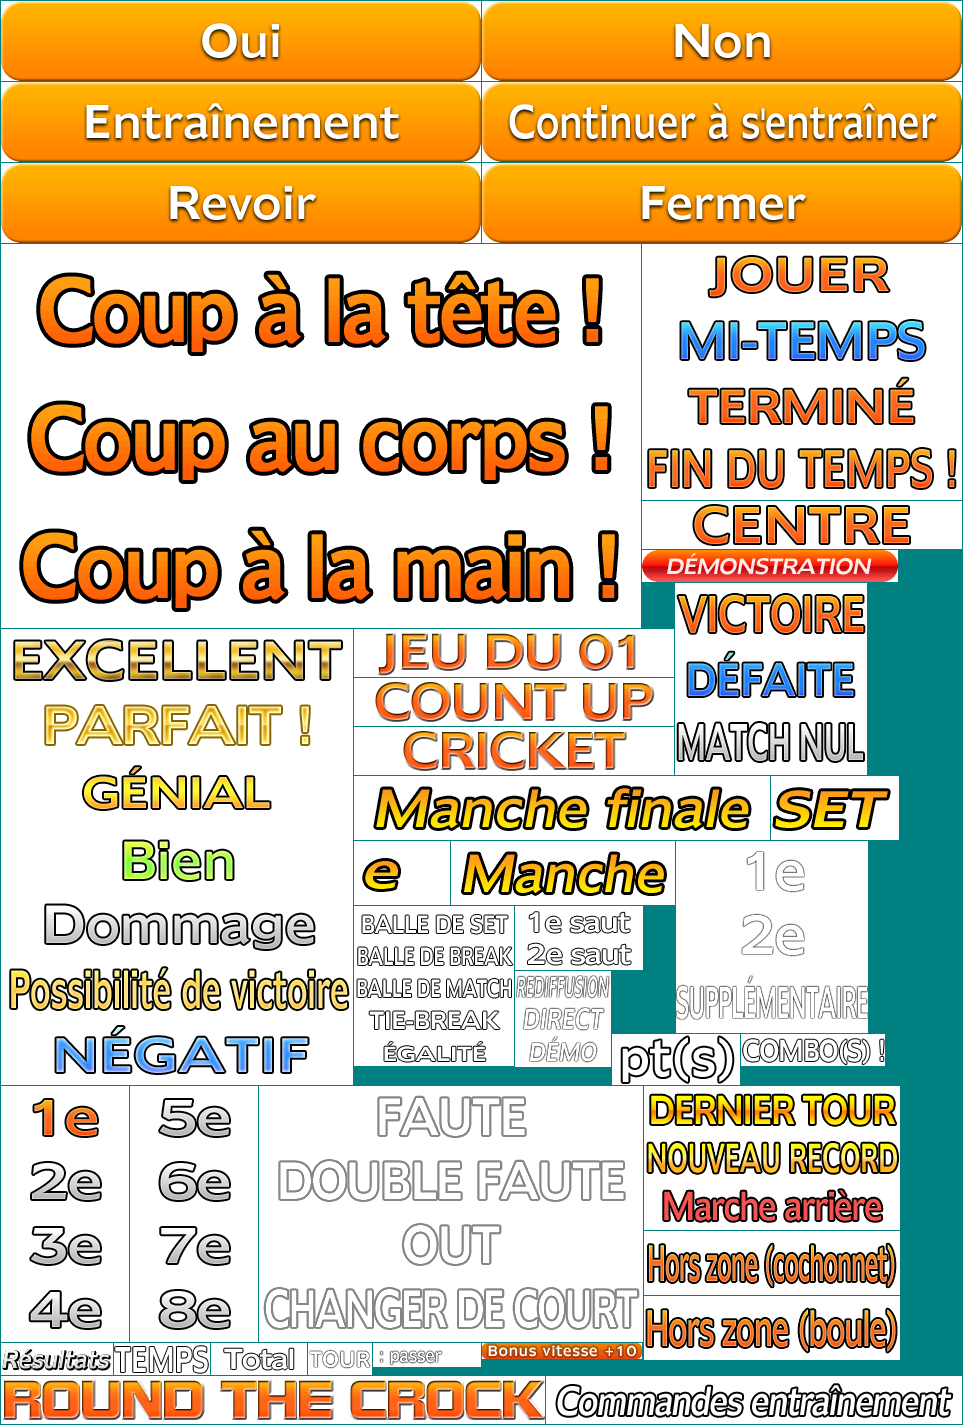 Text (French)